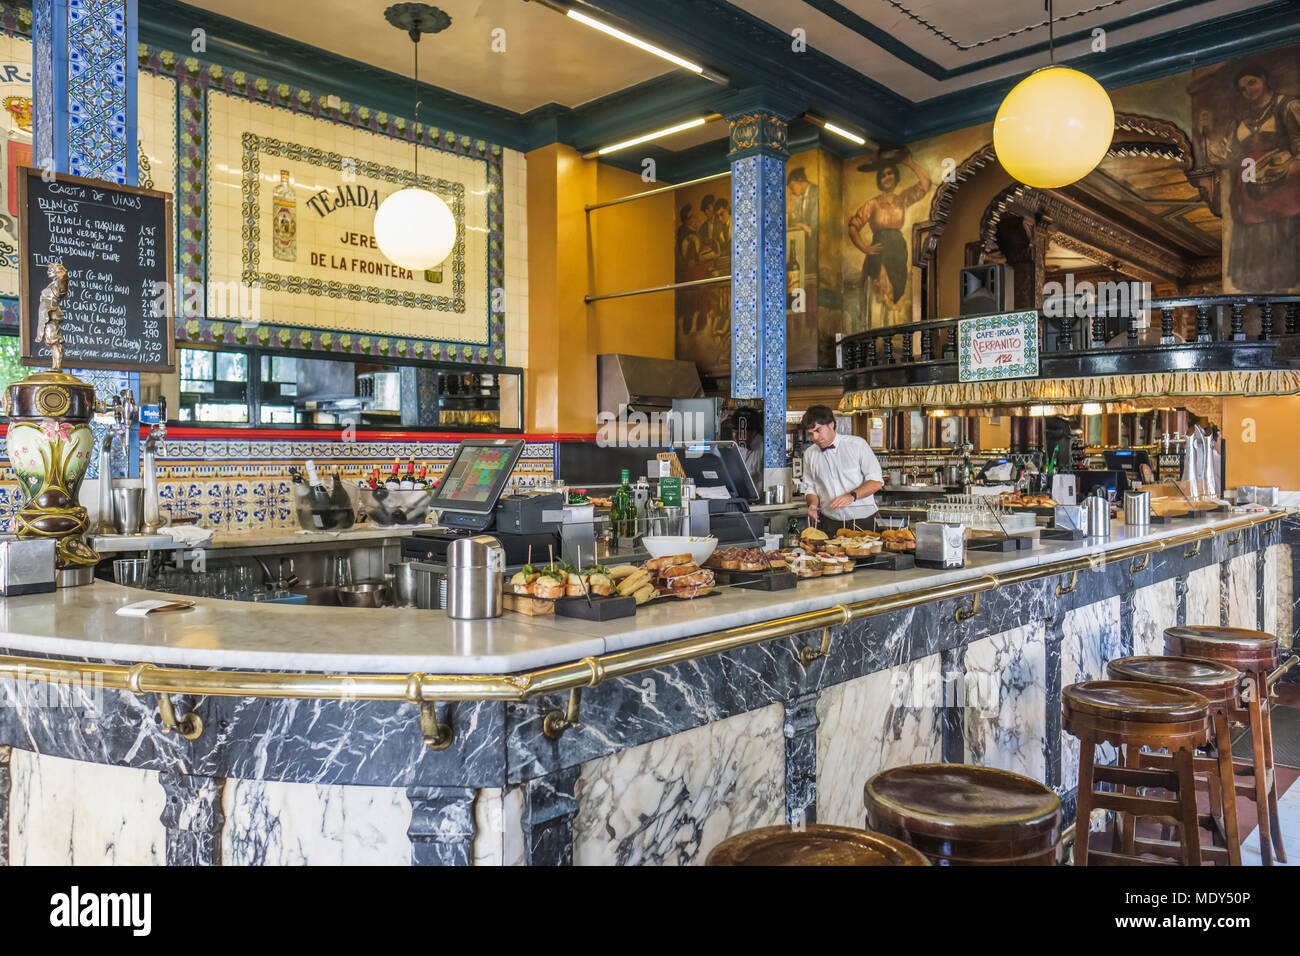 Cafe Iruna and a worker behind the counter with food on display, Bilbao, Spain Stock Photo